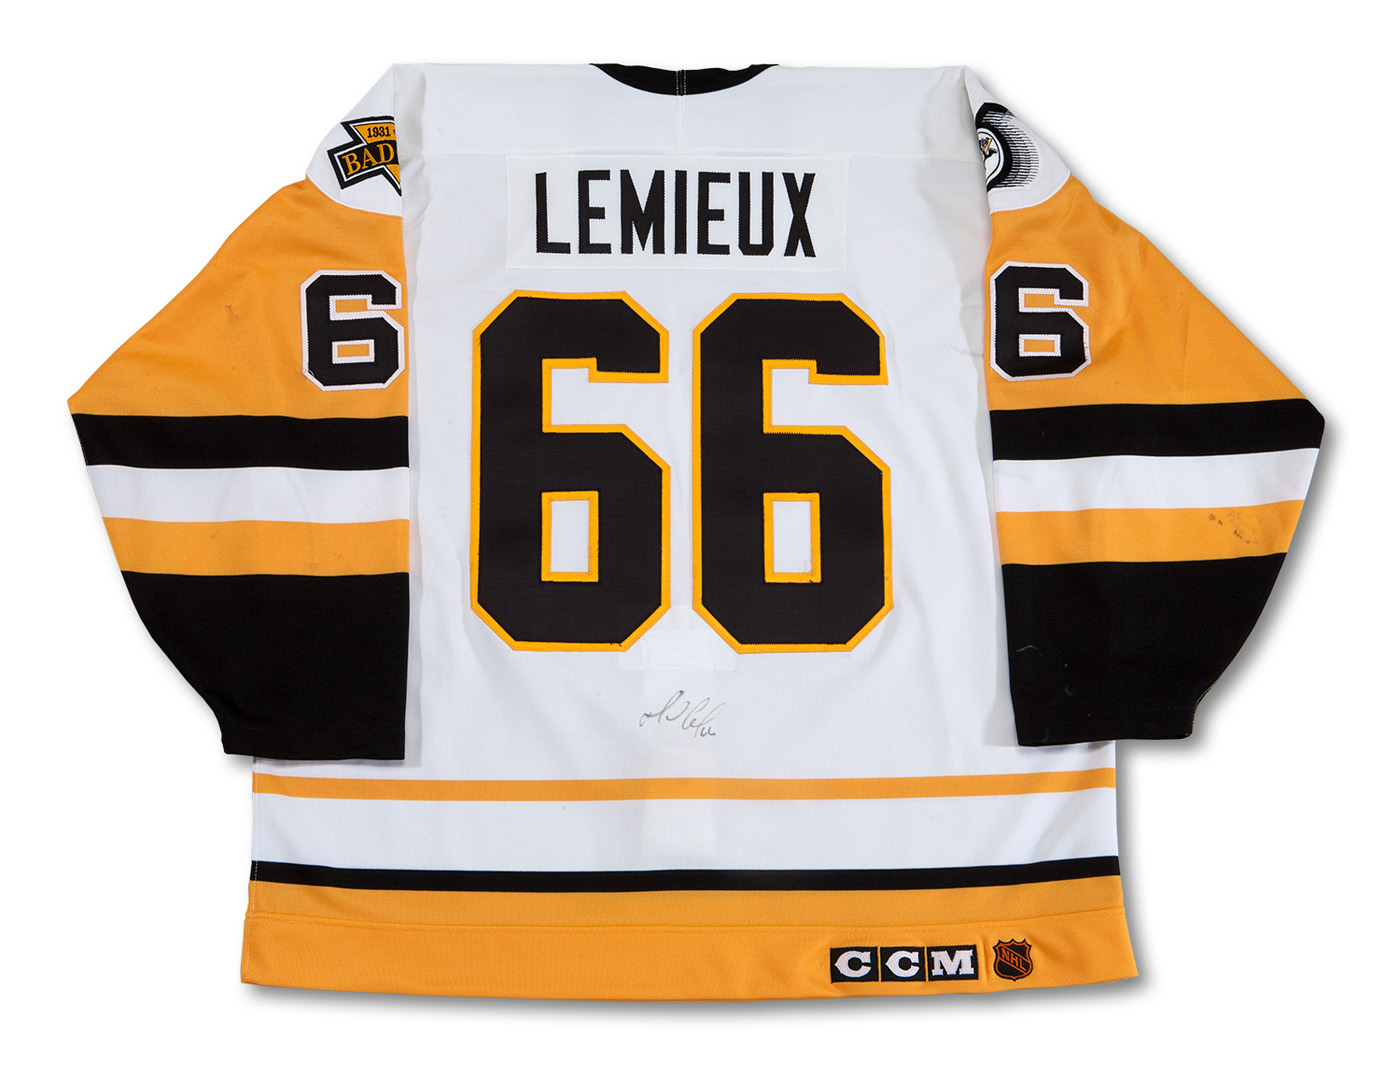 Pittsburgh Penguins Signed Jerseys, Collectible Penguins Jerseys